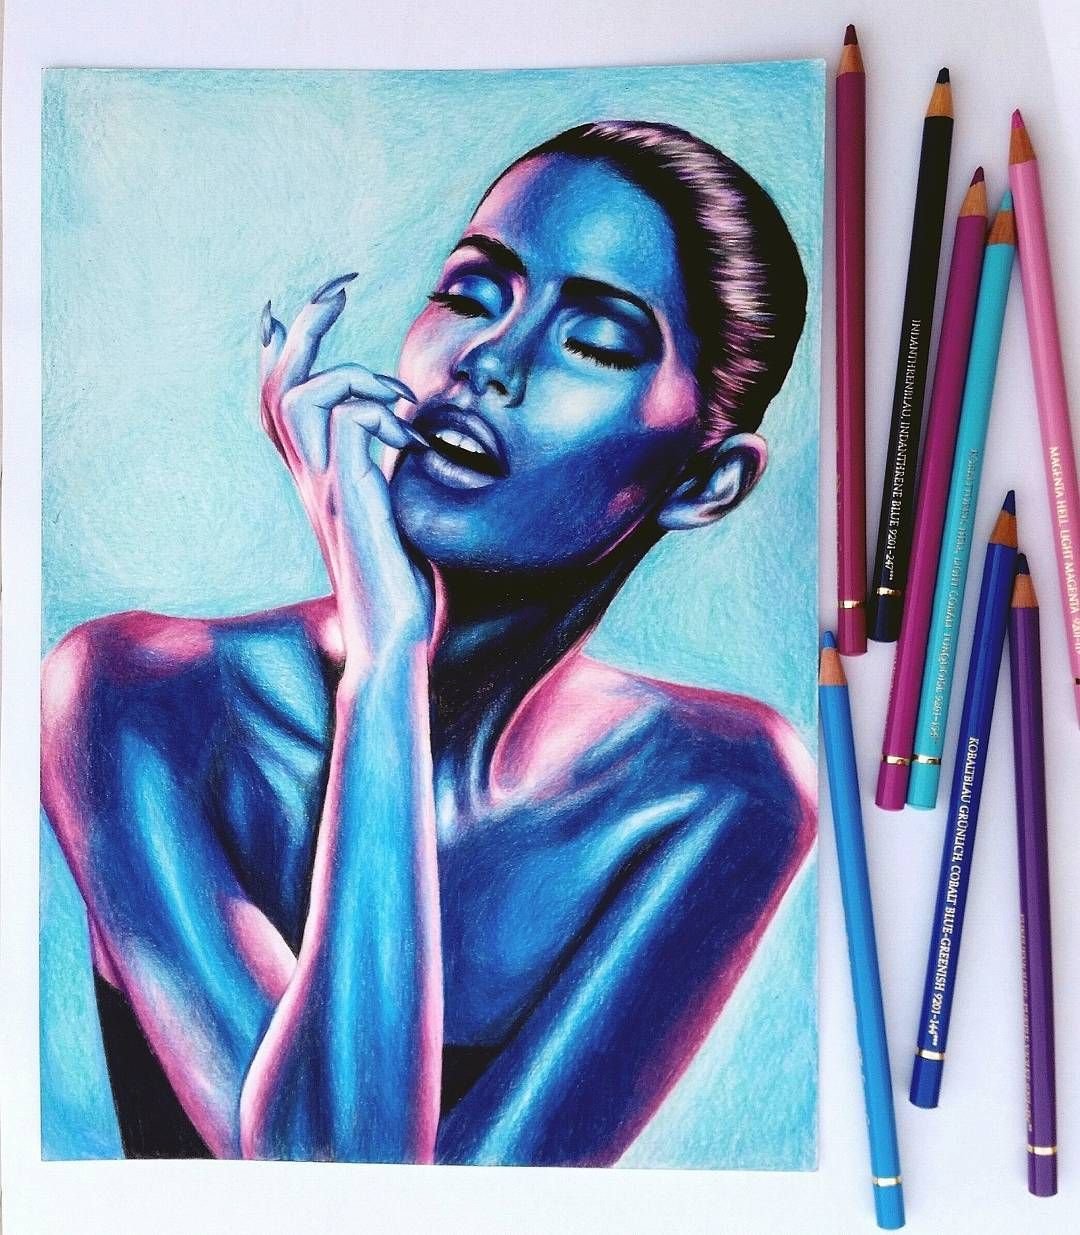 Lip drawing by @world_in_colorr | Prismacolor art, Hard drawings, Colorful  drawings